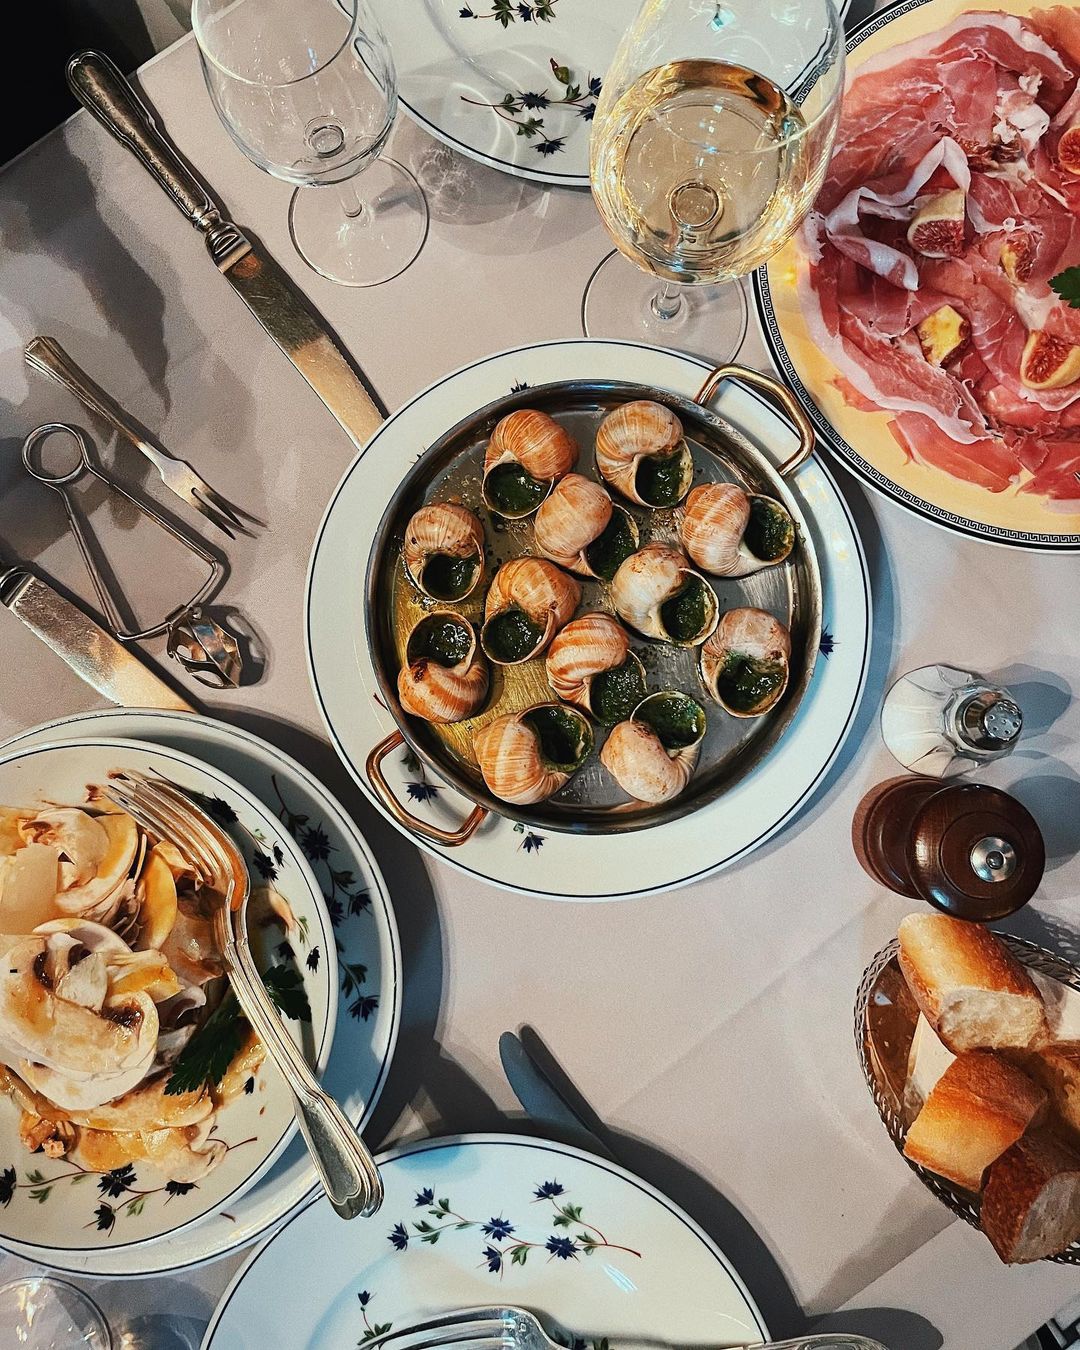 Escargots and Iberica ham at Le Voltaire